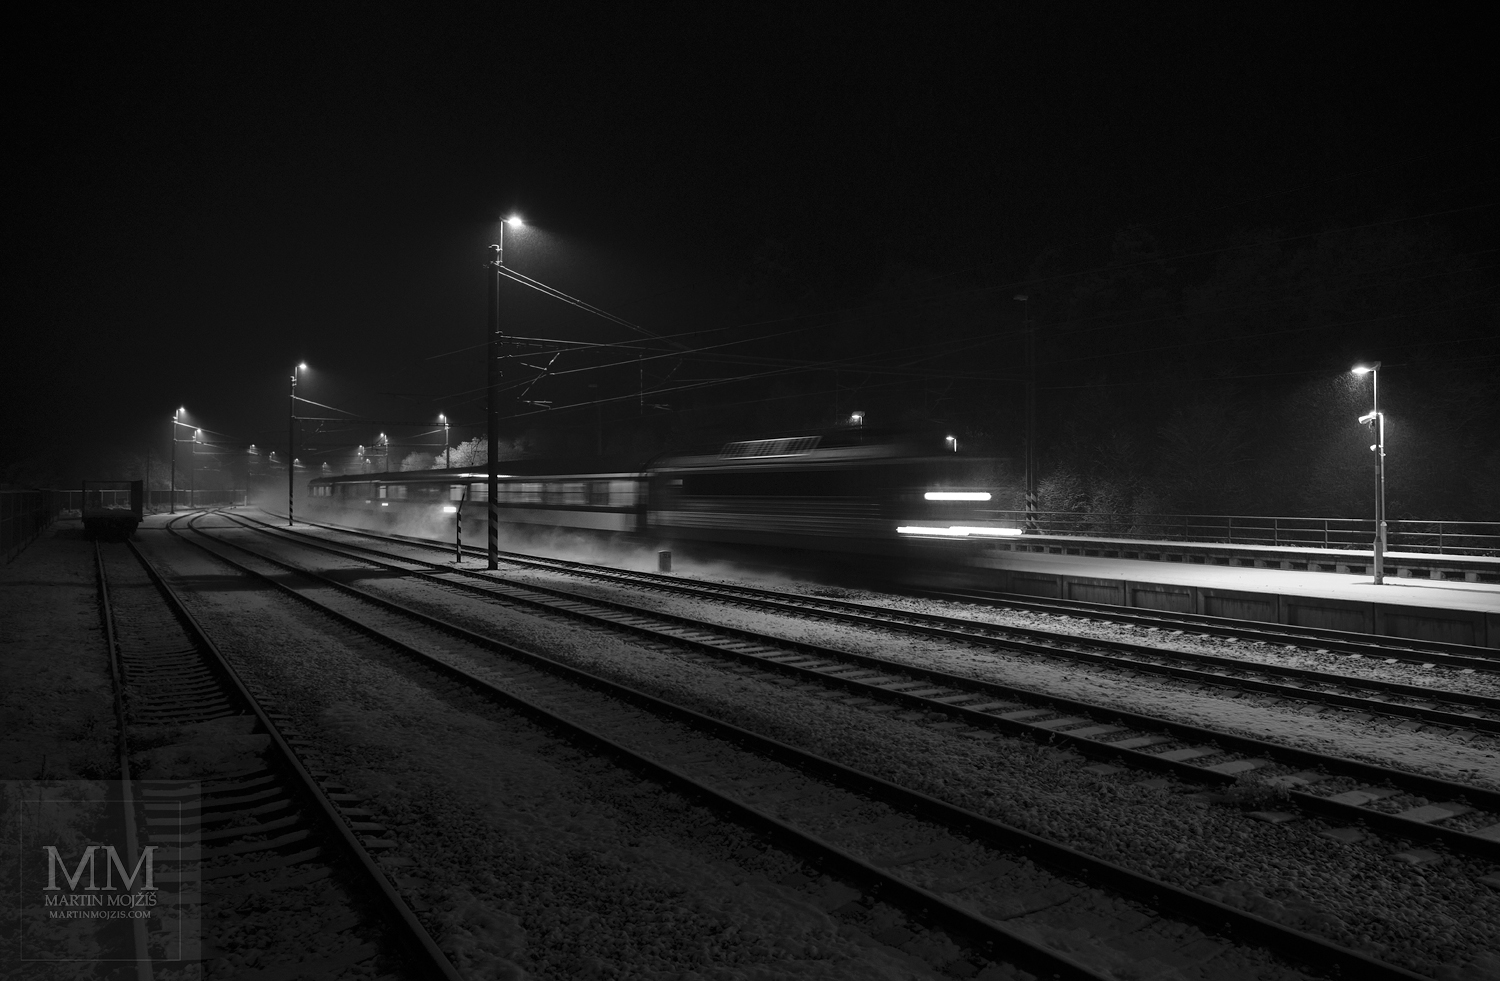 Night train running on an illuminated snowy track. Black and white fine art photograph THROUGH THE SNOWY NIGHT I., photographed by Martin Mojzis.